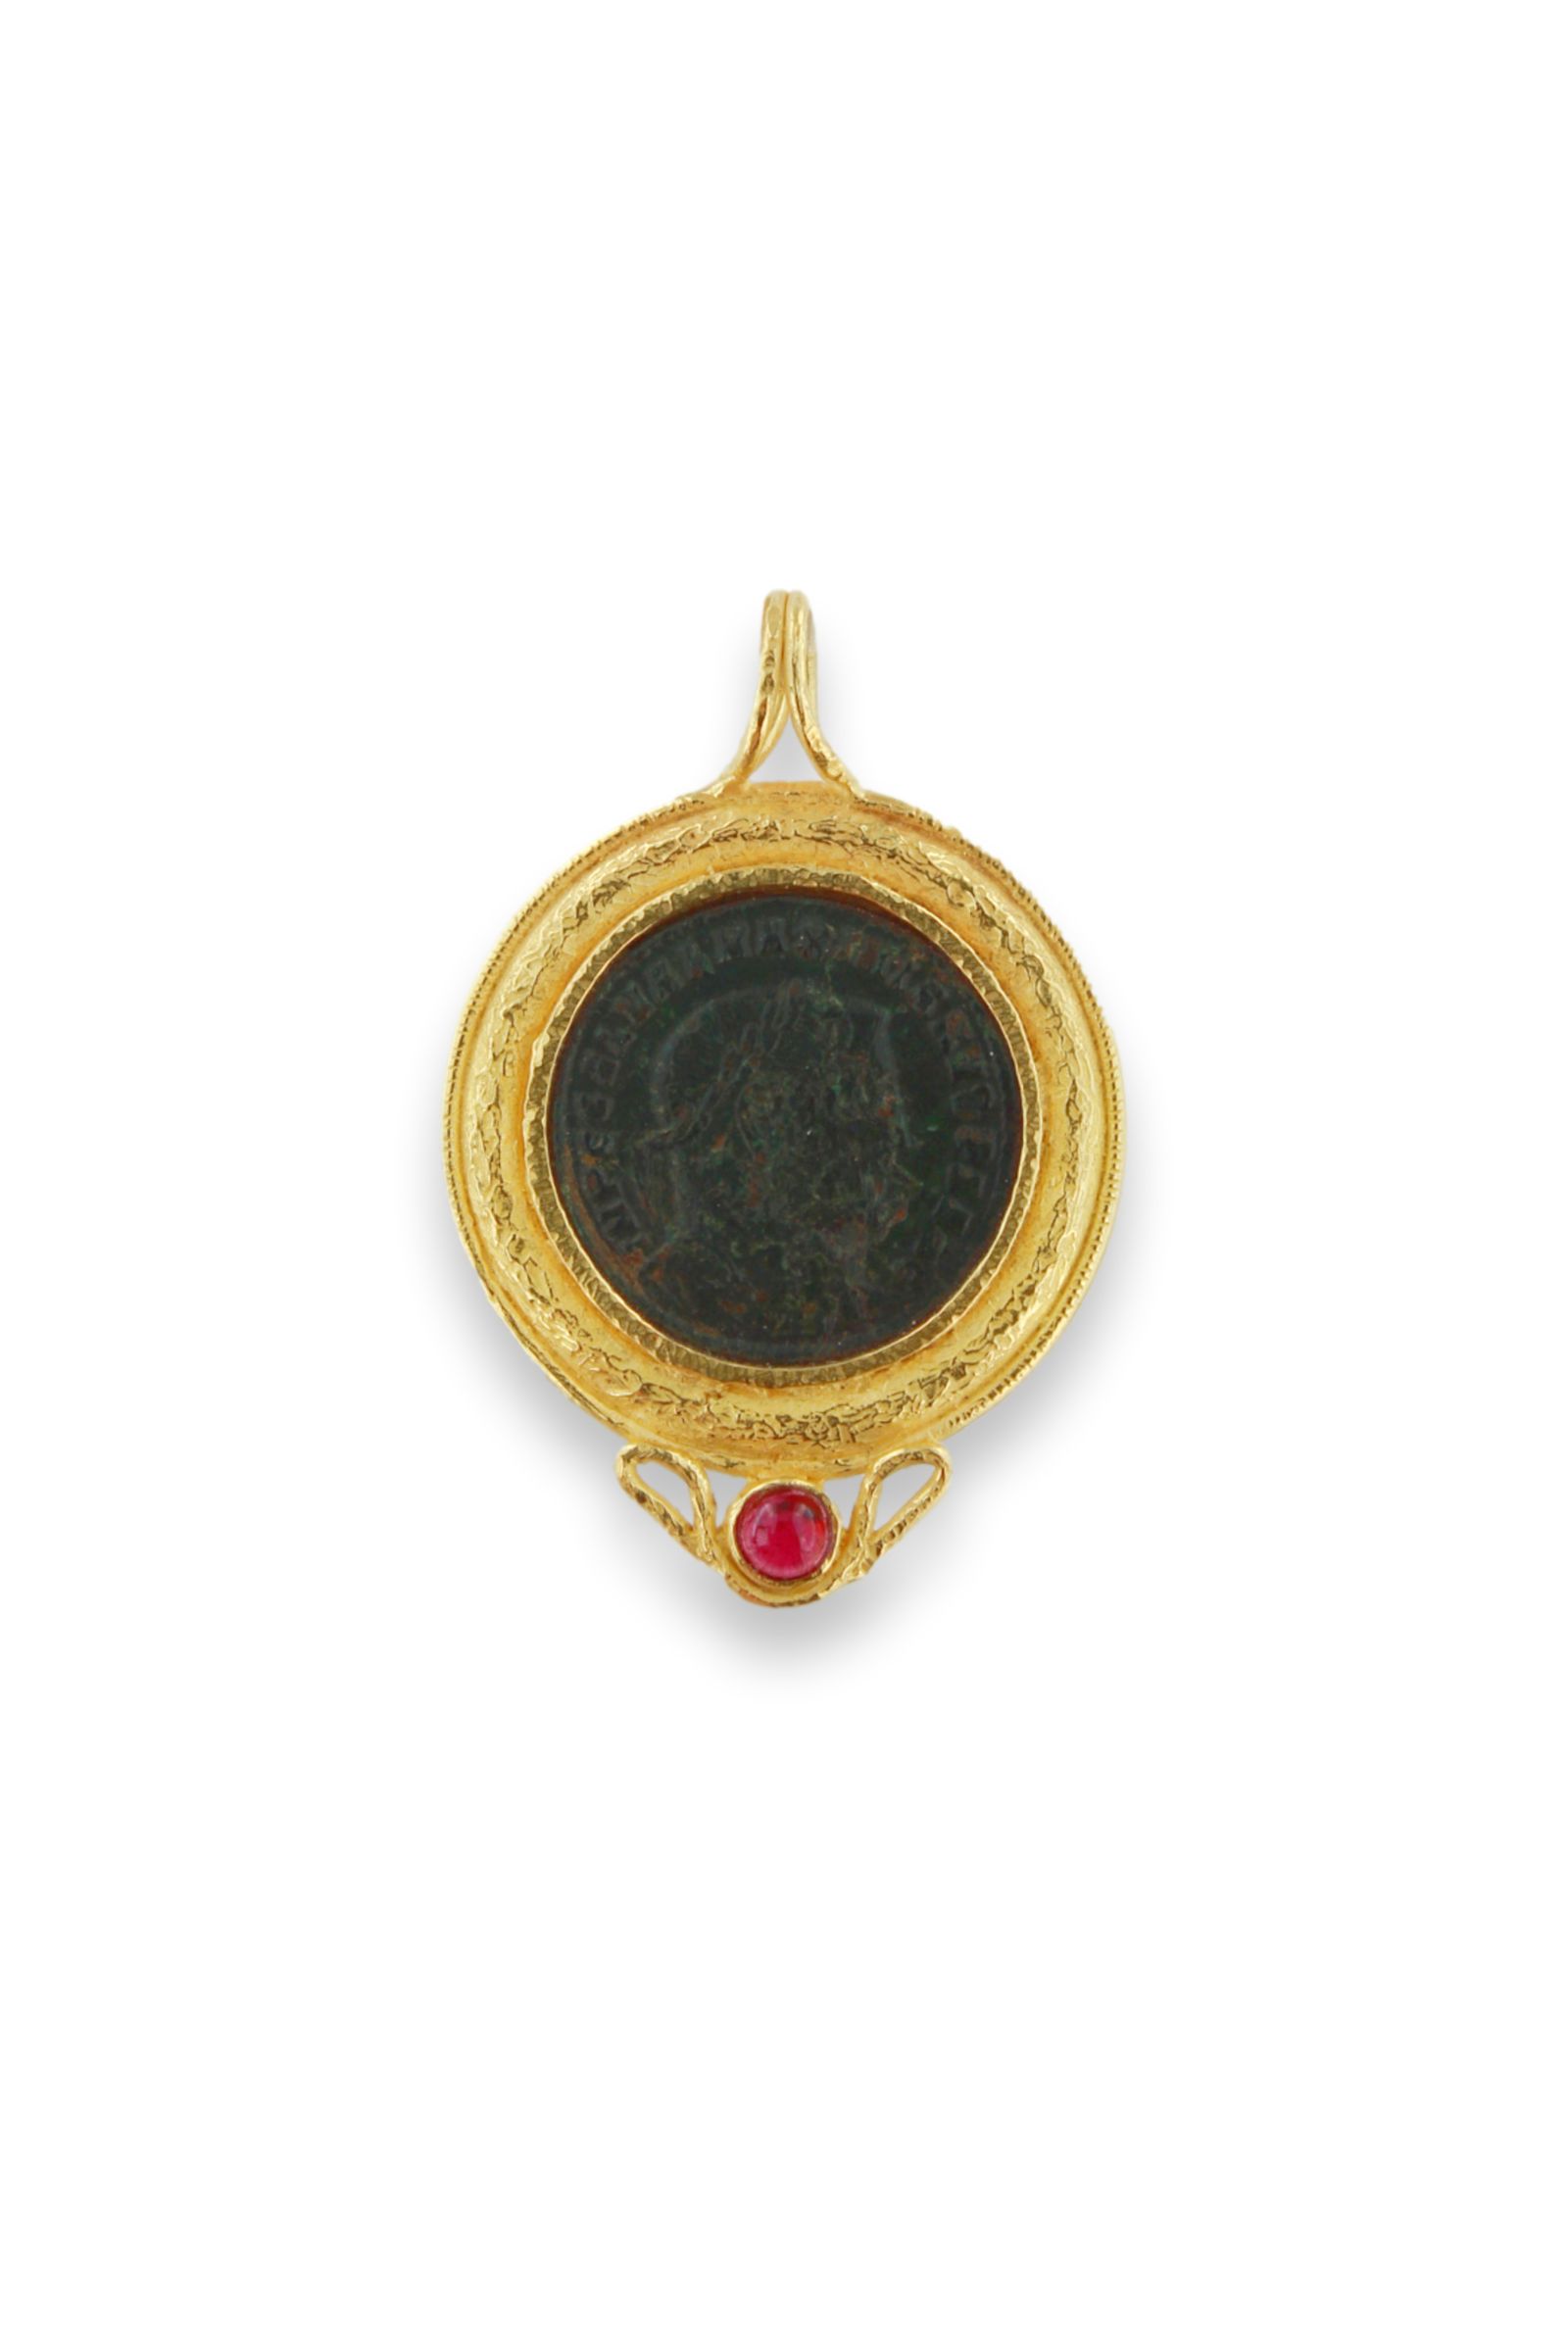 SH611B-18-Kt-Yellow-Gold-Pendant-with-Roman-Coin-and-Granet-Cabochon-1_